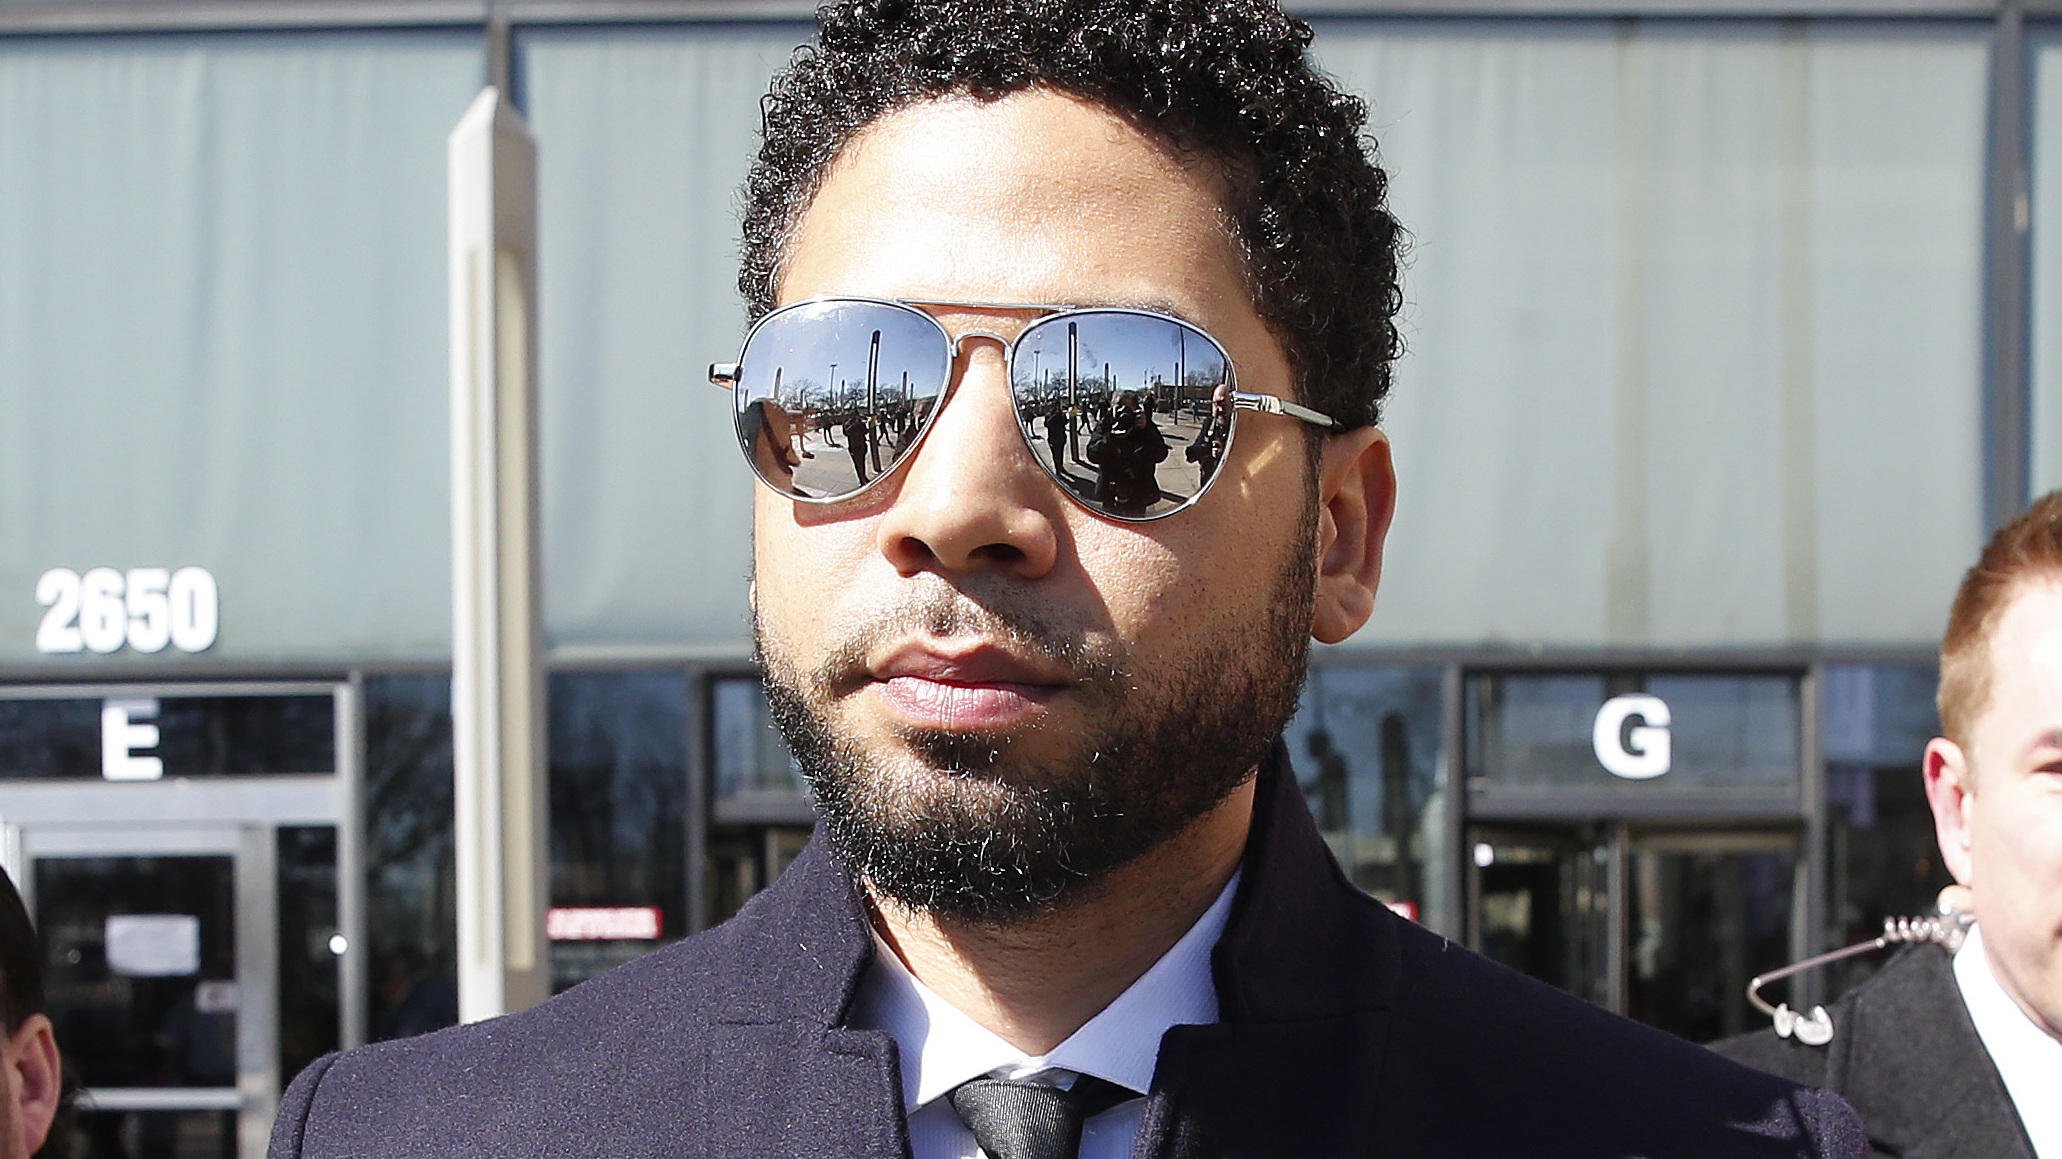 Judge Orders Special Prosecutor To Review Handling Of Jussie Smollett Case | NPR Illinois2062 x 1159